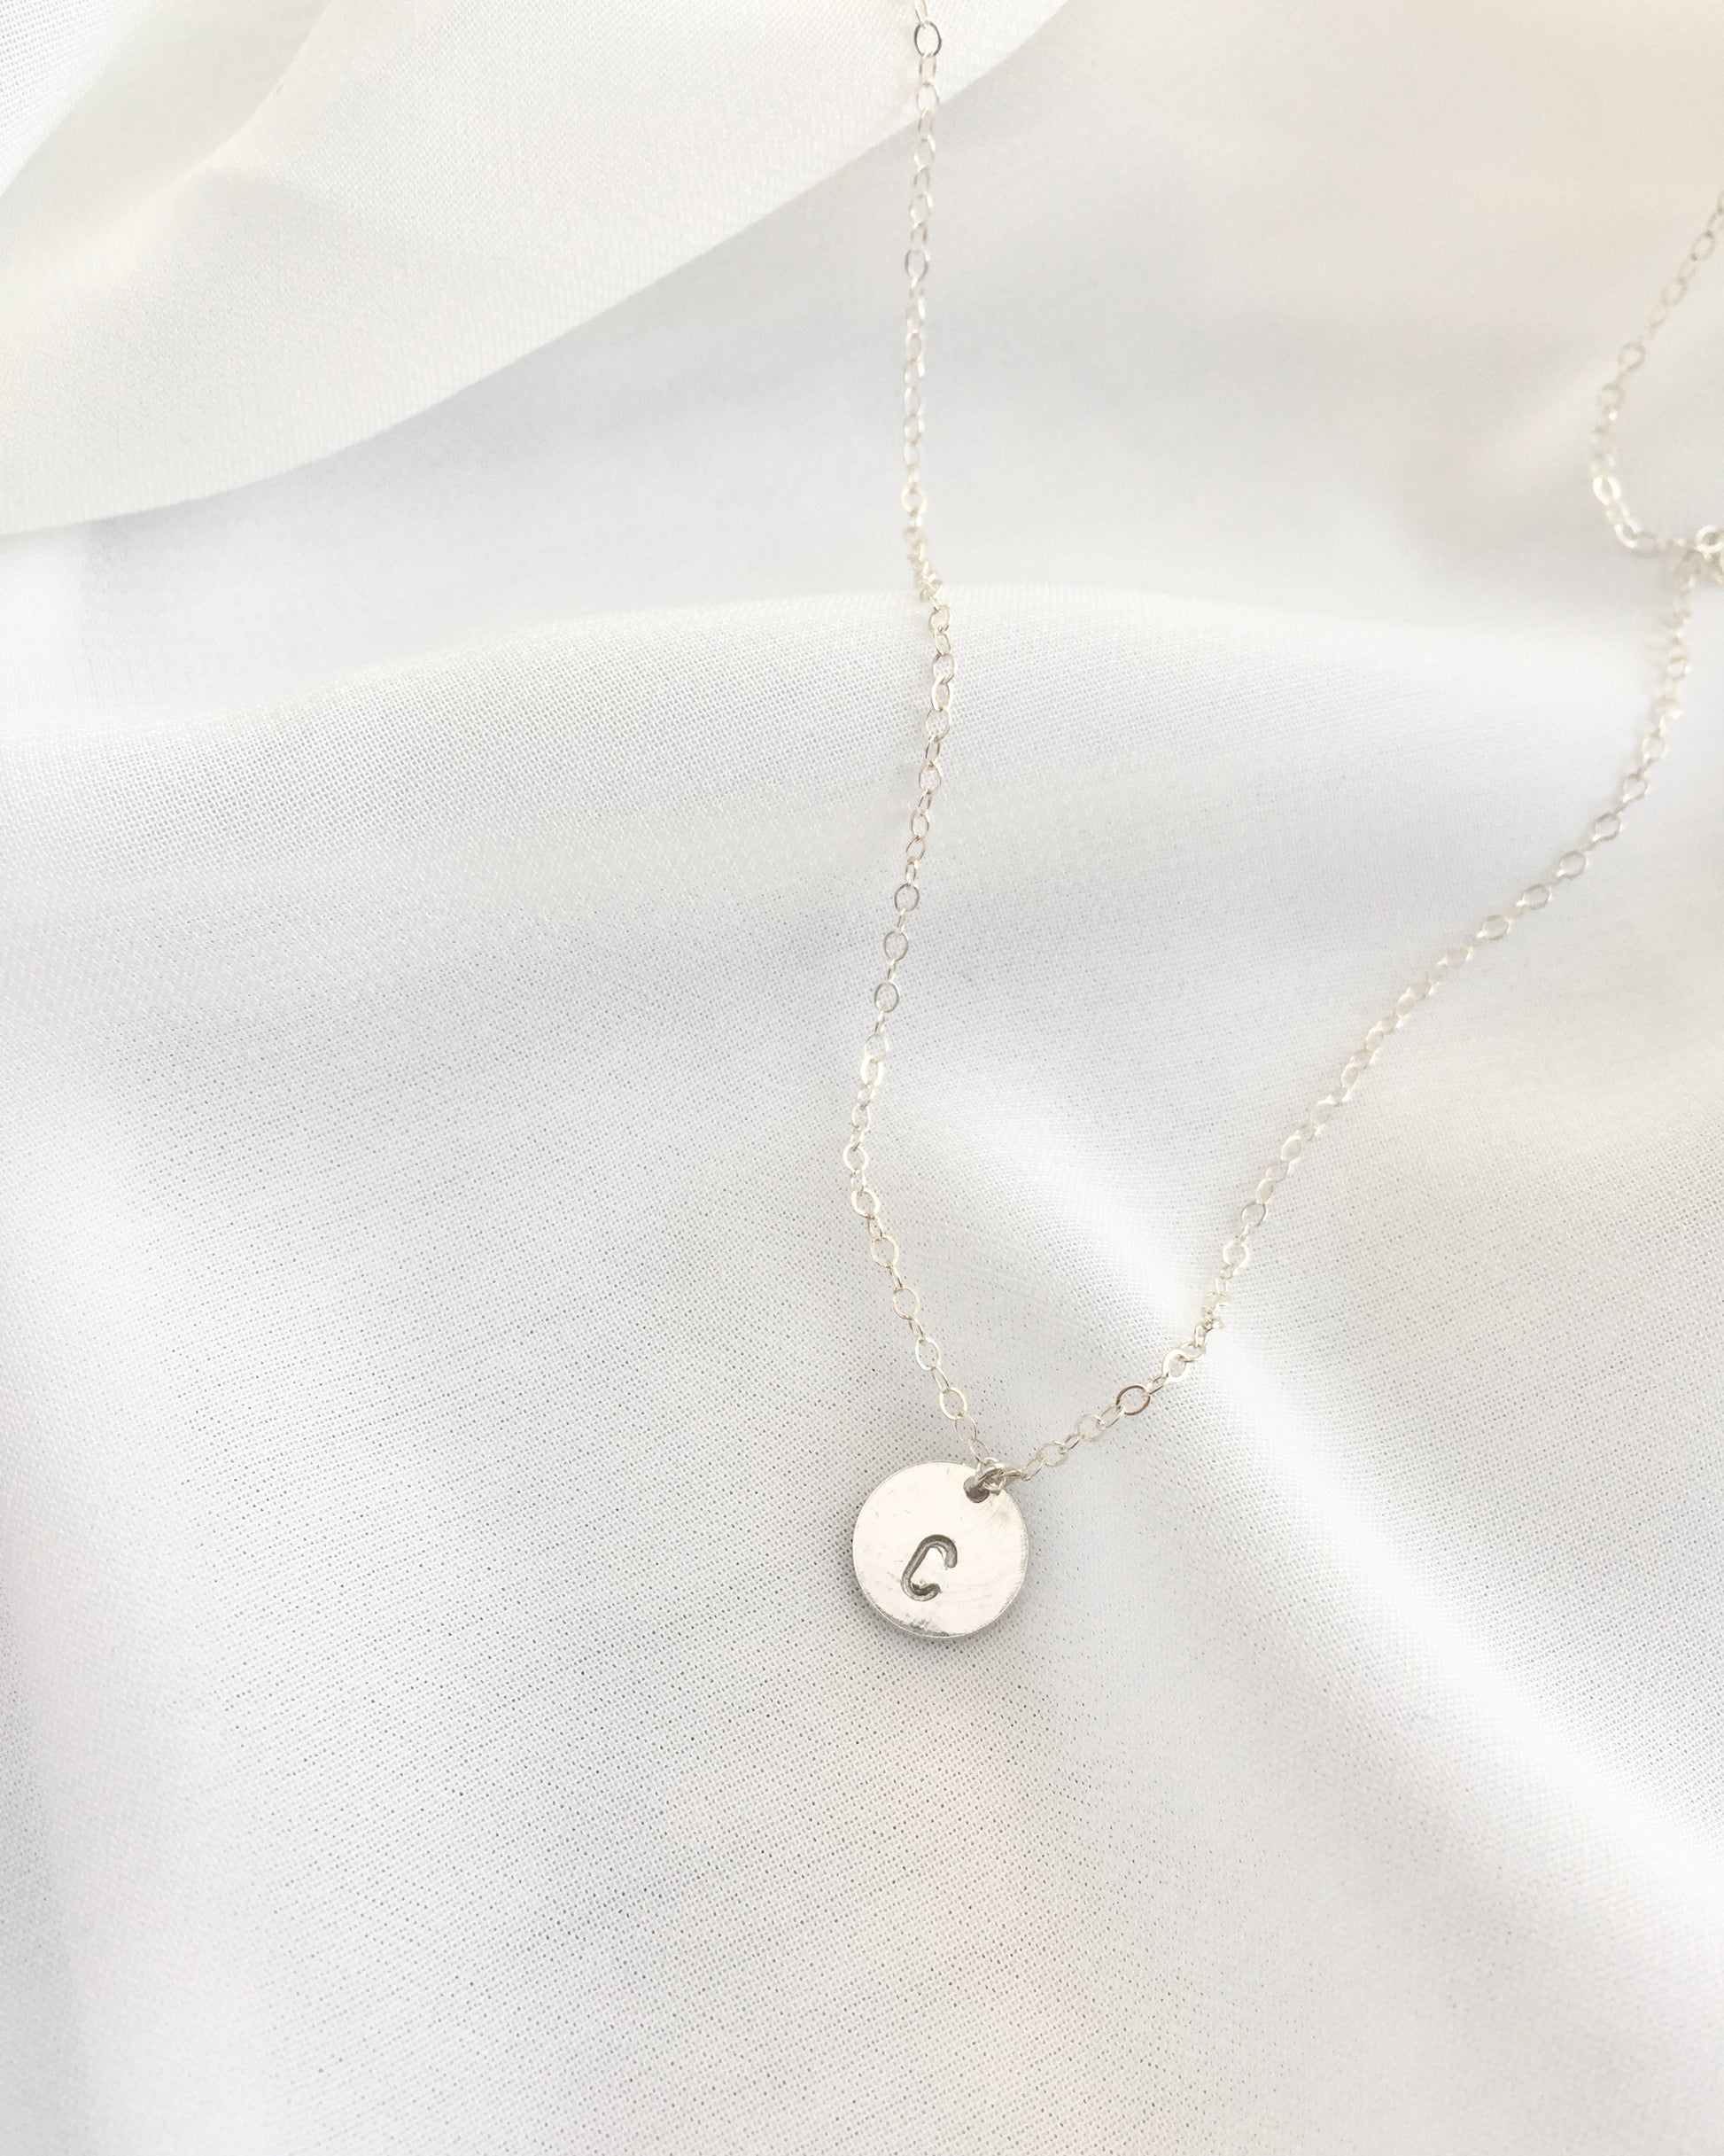 Delicate Initial Necklace in Sterling Silver or Gold Filled | Dainty Initial Necklace | IB Jewelry